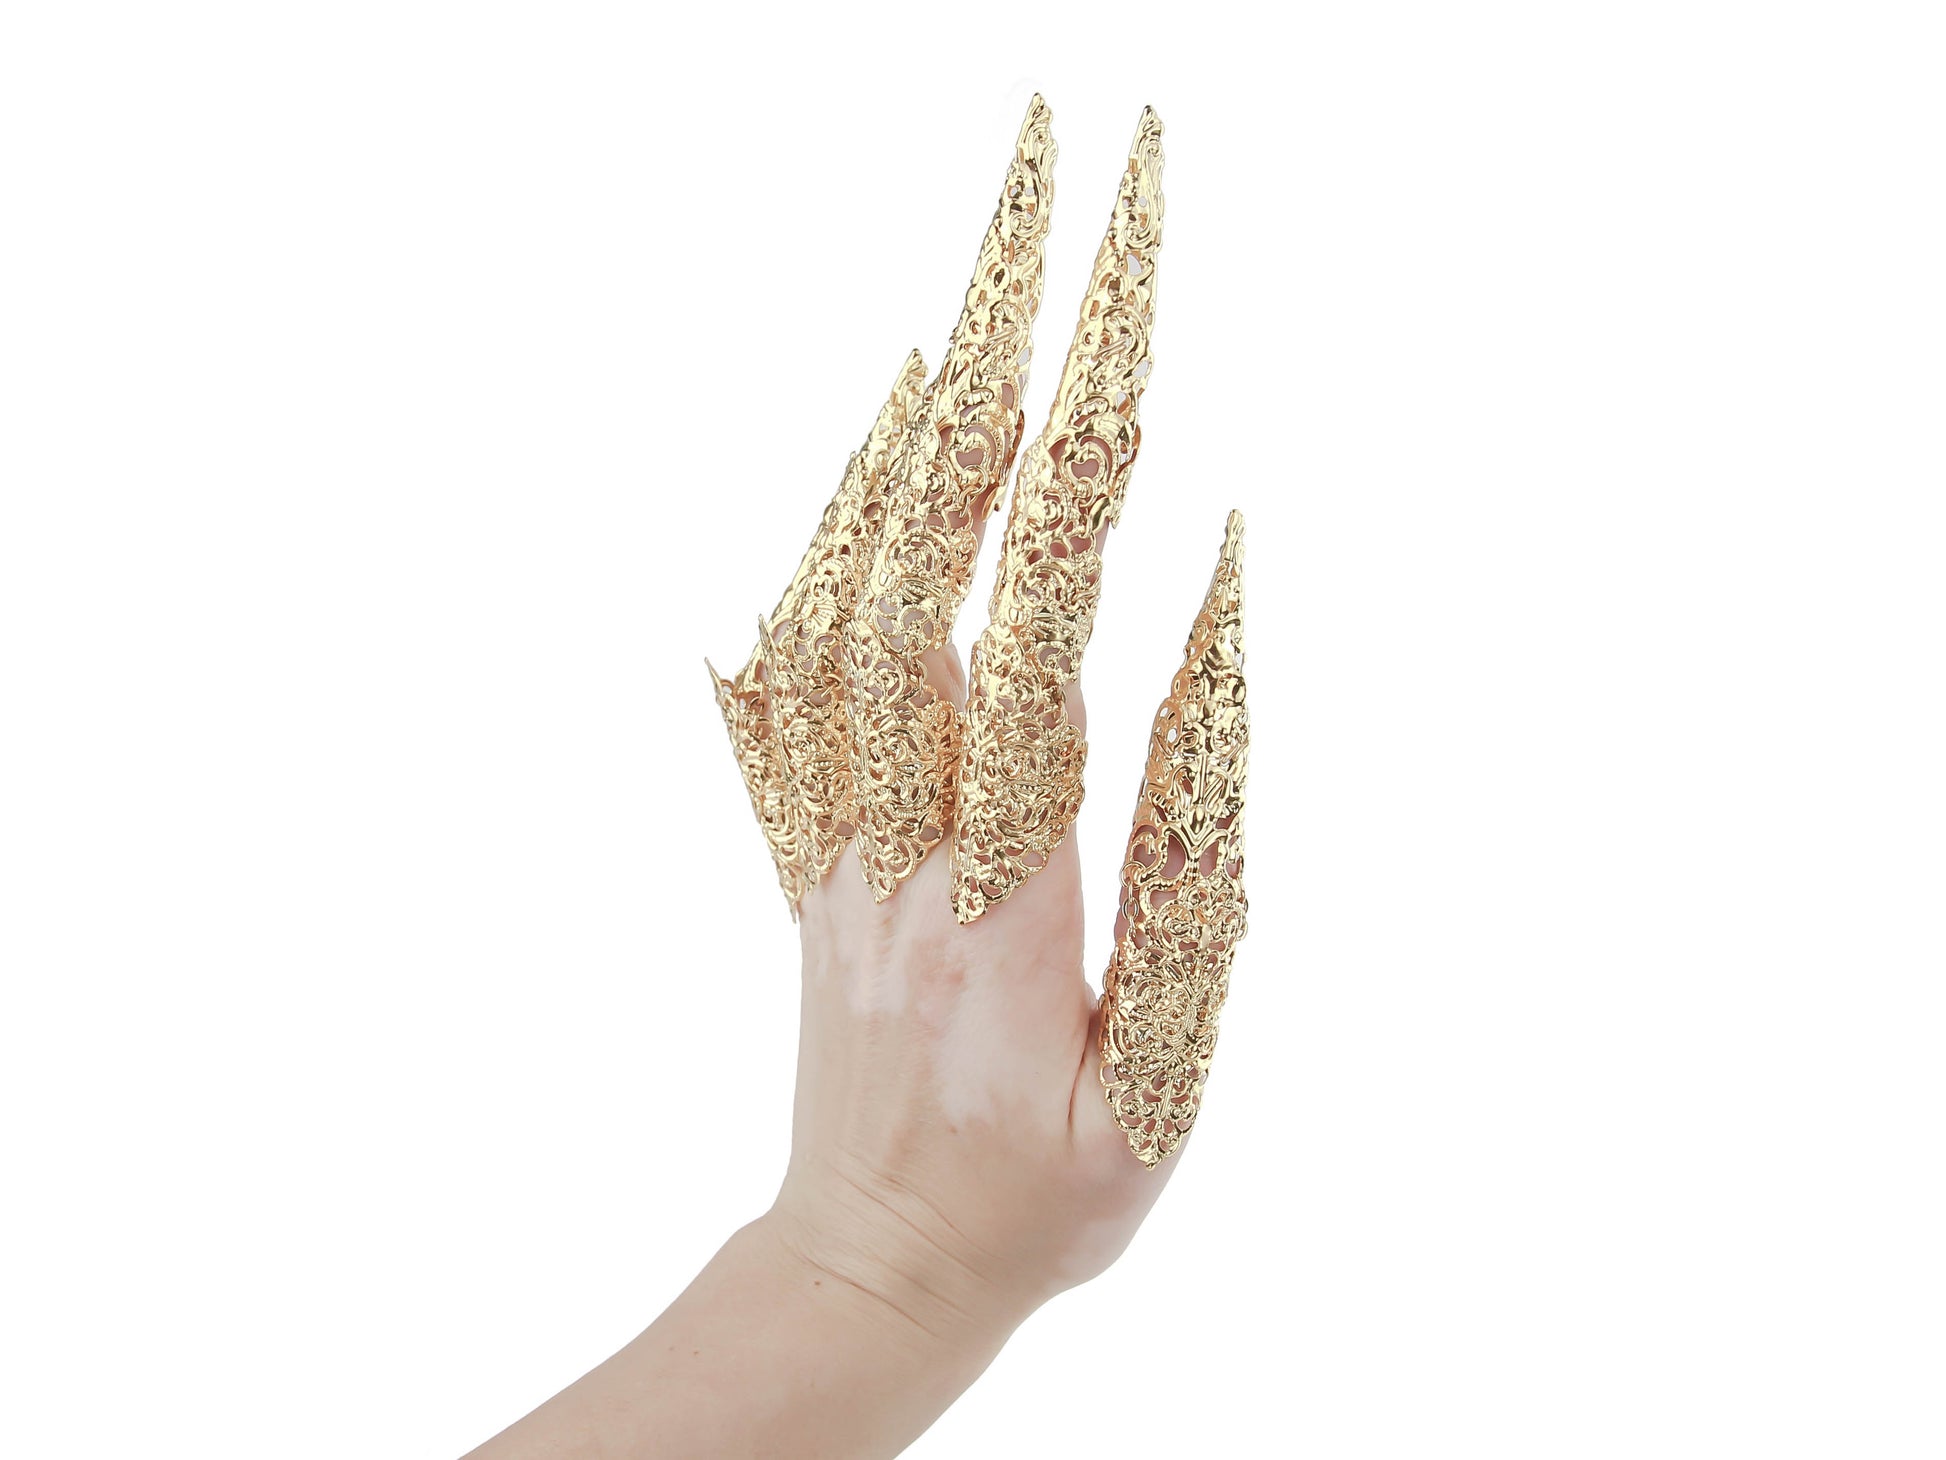 A hand dons an intricate set of full-finger gold claw rings with elongated nails, showcasing a neo goth aesthetic from Myril Jewels. These gold rings merge Halloween Jewelry and Neo Gothic Jewels influences, making a statement piece suitable for gothic-chic enthusiasts. Ideal for bold accessorizing, these rings serve as a striking goth girlfriend gift or a standout addition to festival jewels collections